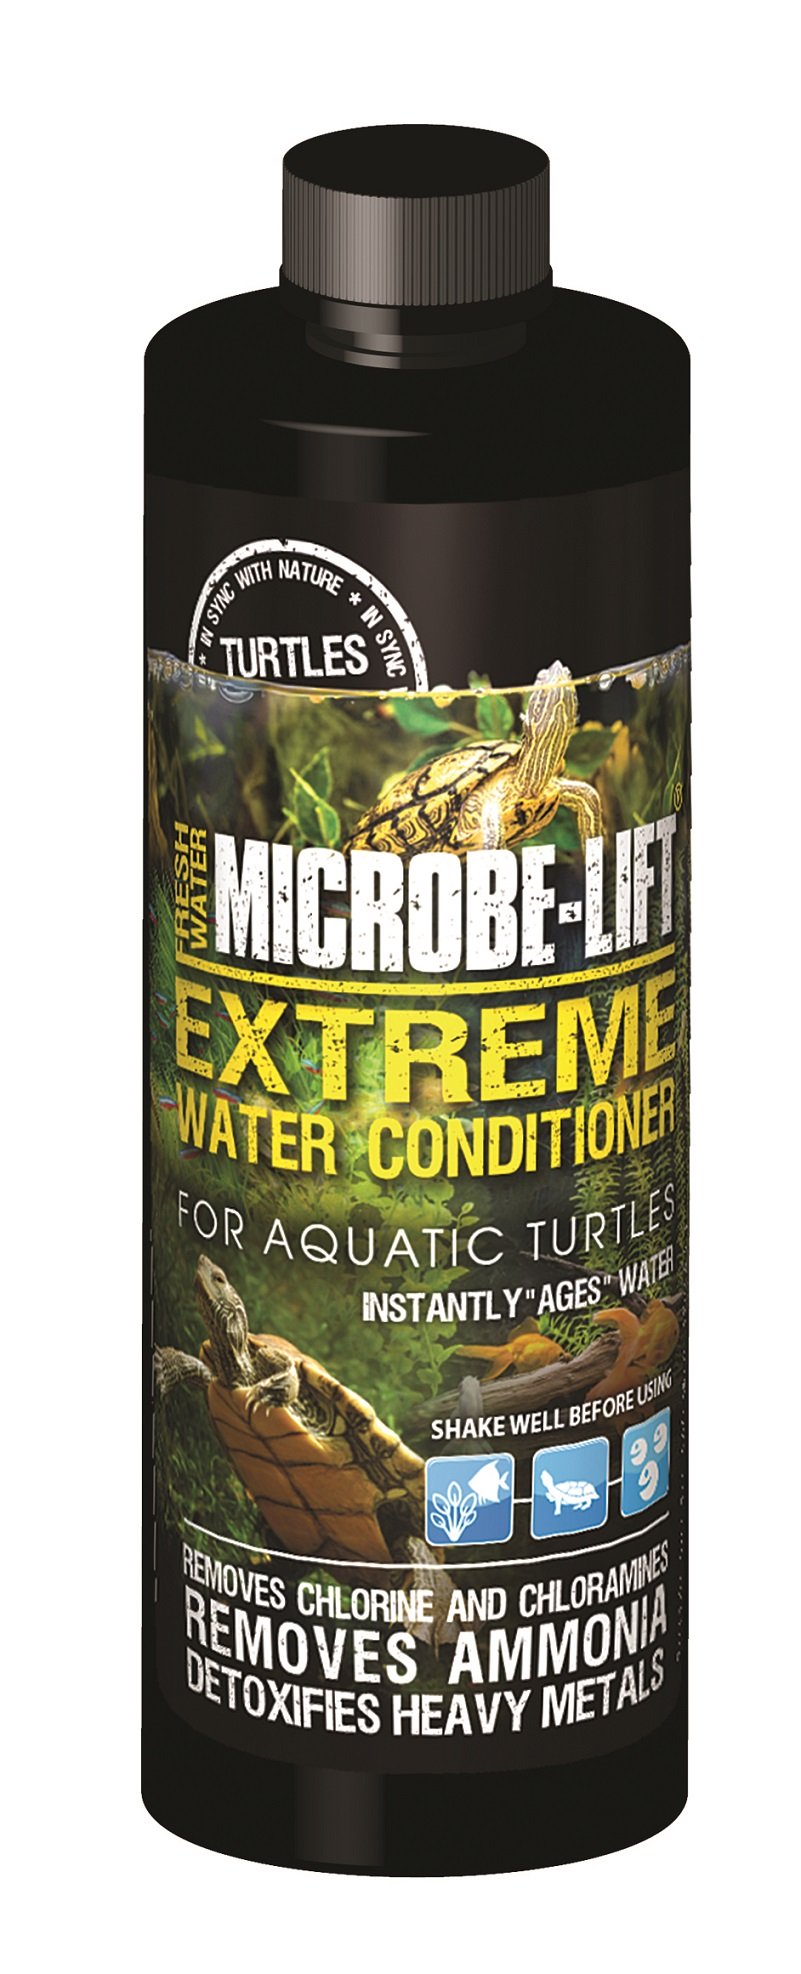 Ecological Lab Microbe-Lift Turtle Extreme Water Conditioner, 4-Ounce